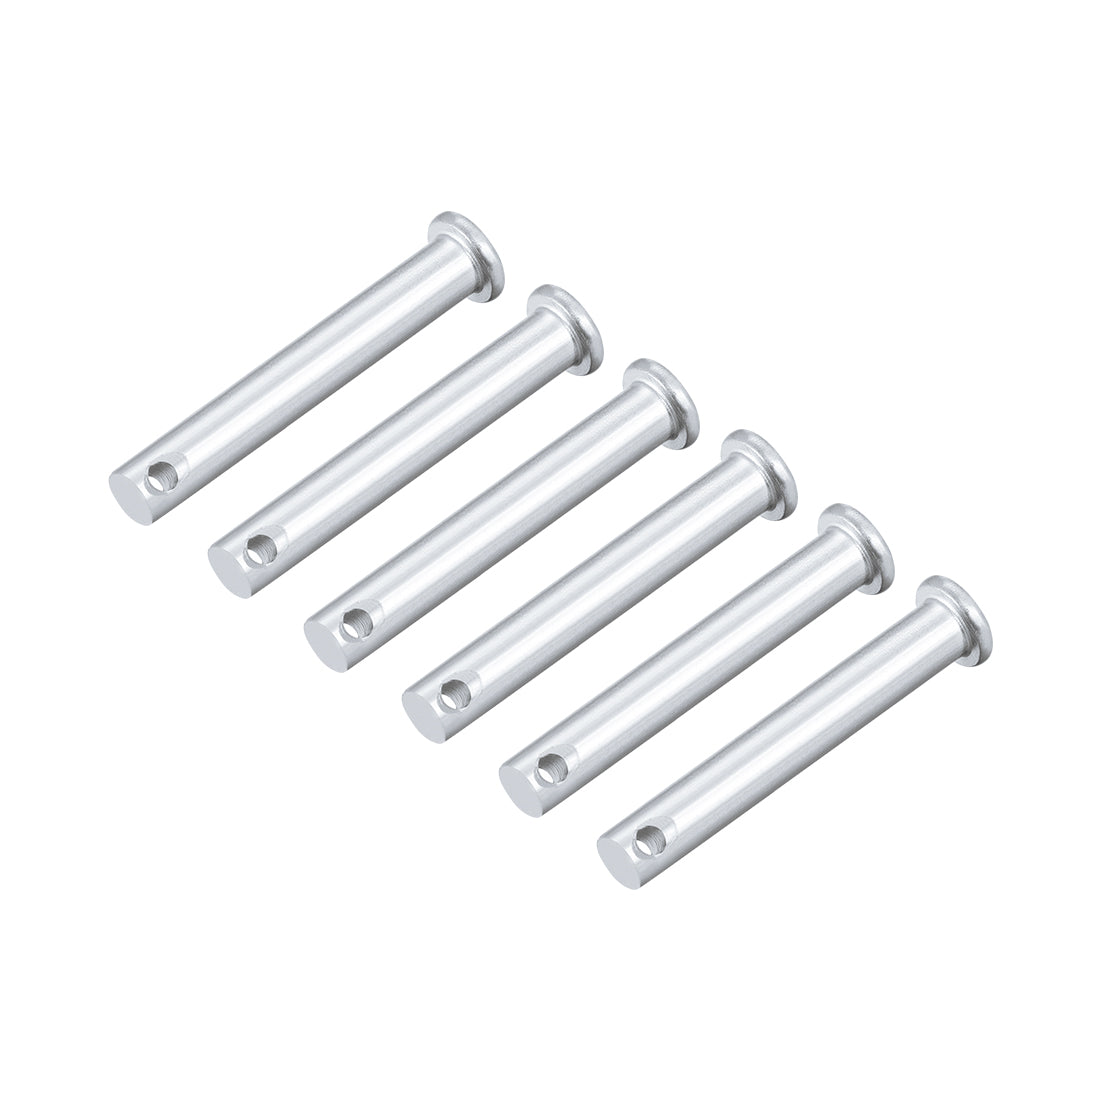 Uxcell Uxcell Single Hole Clevis Pins - 10mm x 45mm Flat Head Zinc-Plating Solid Steel Link Hinge Pin 6Pcs